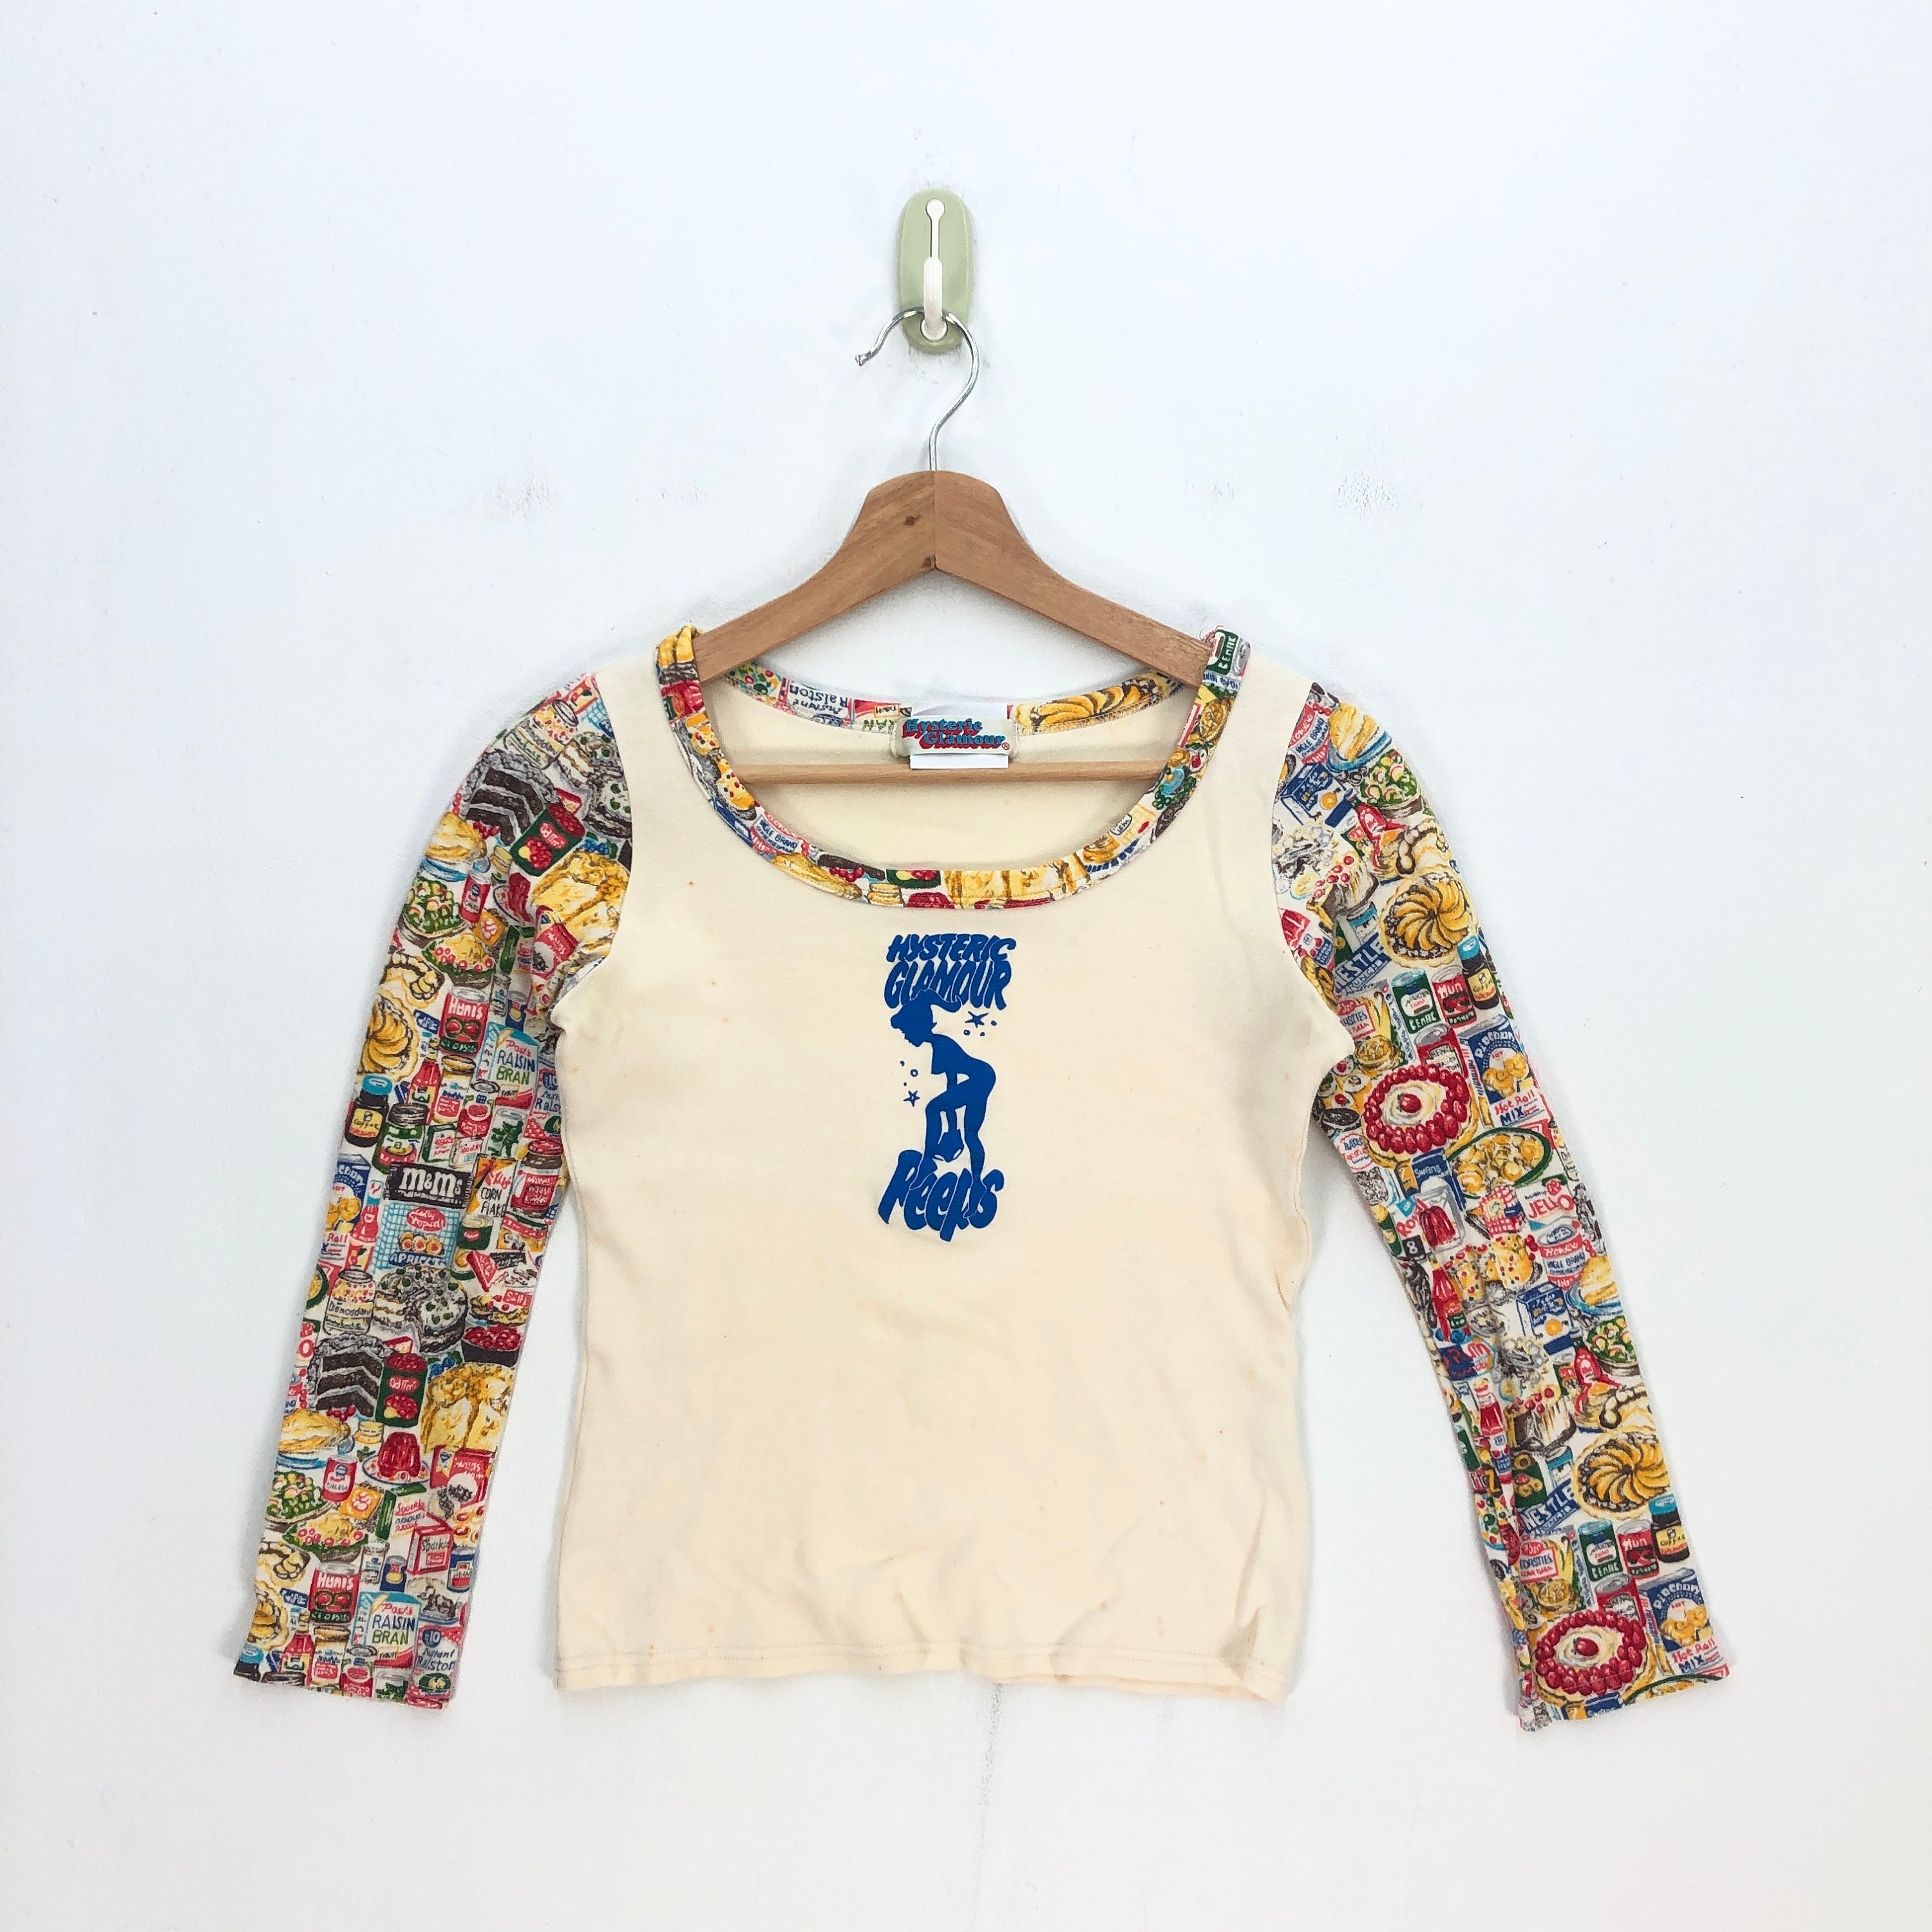 Hysteric Glamour T - Etsy